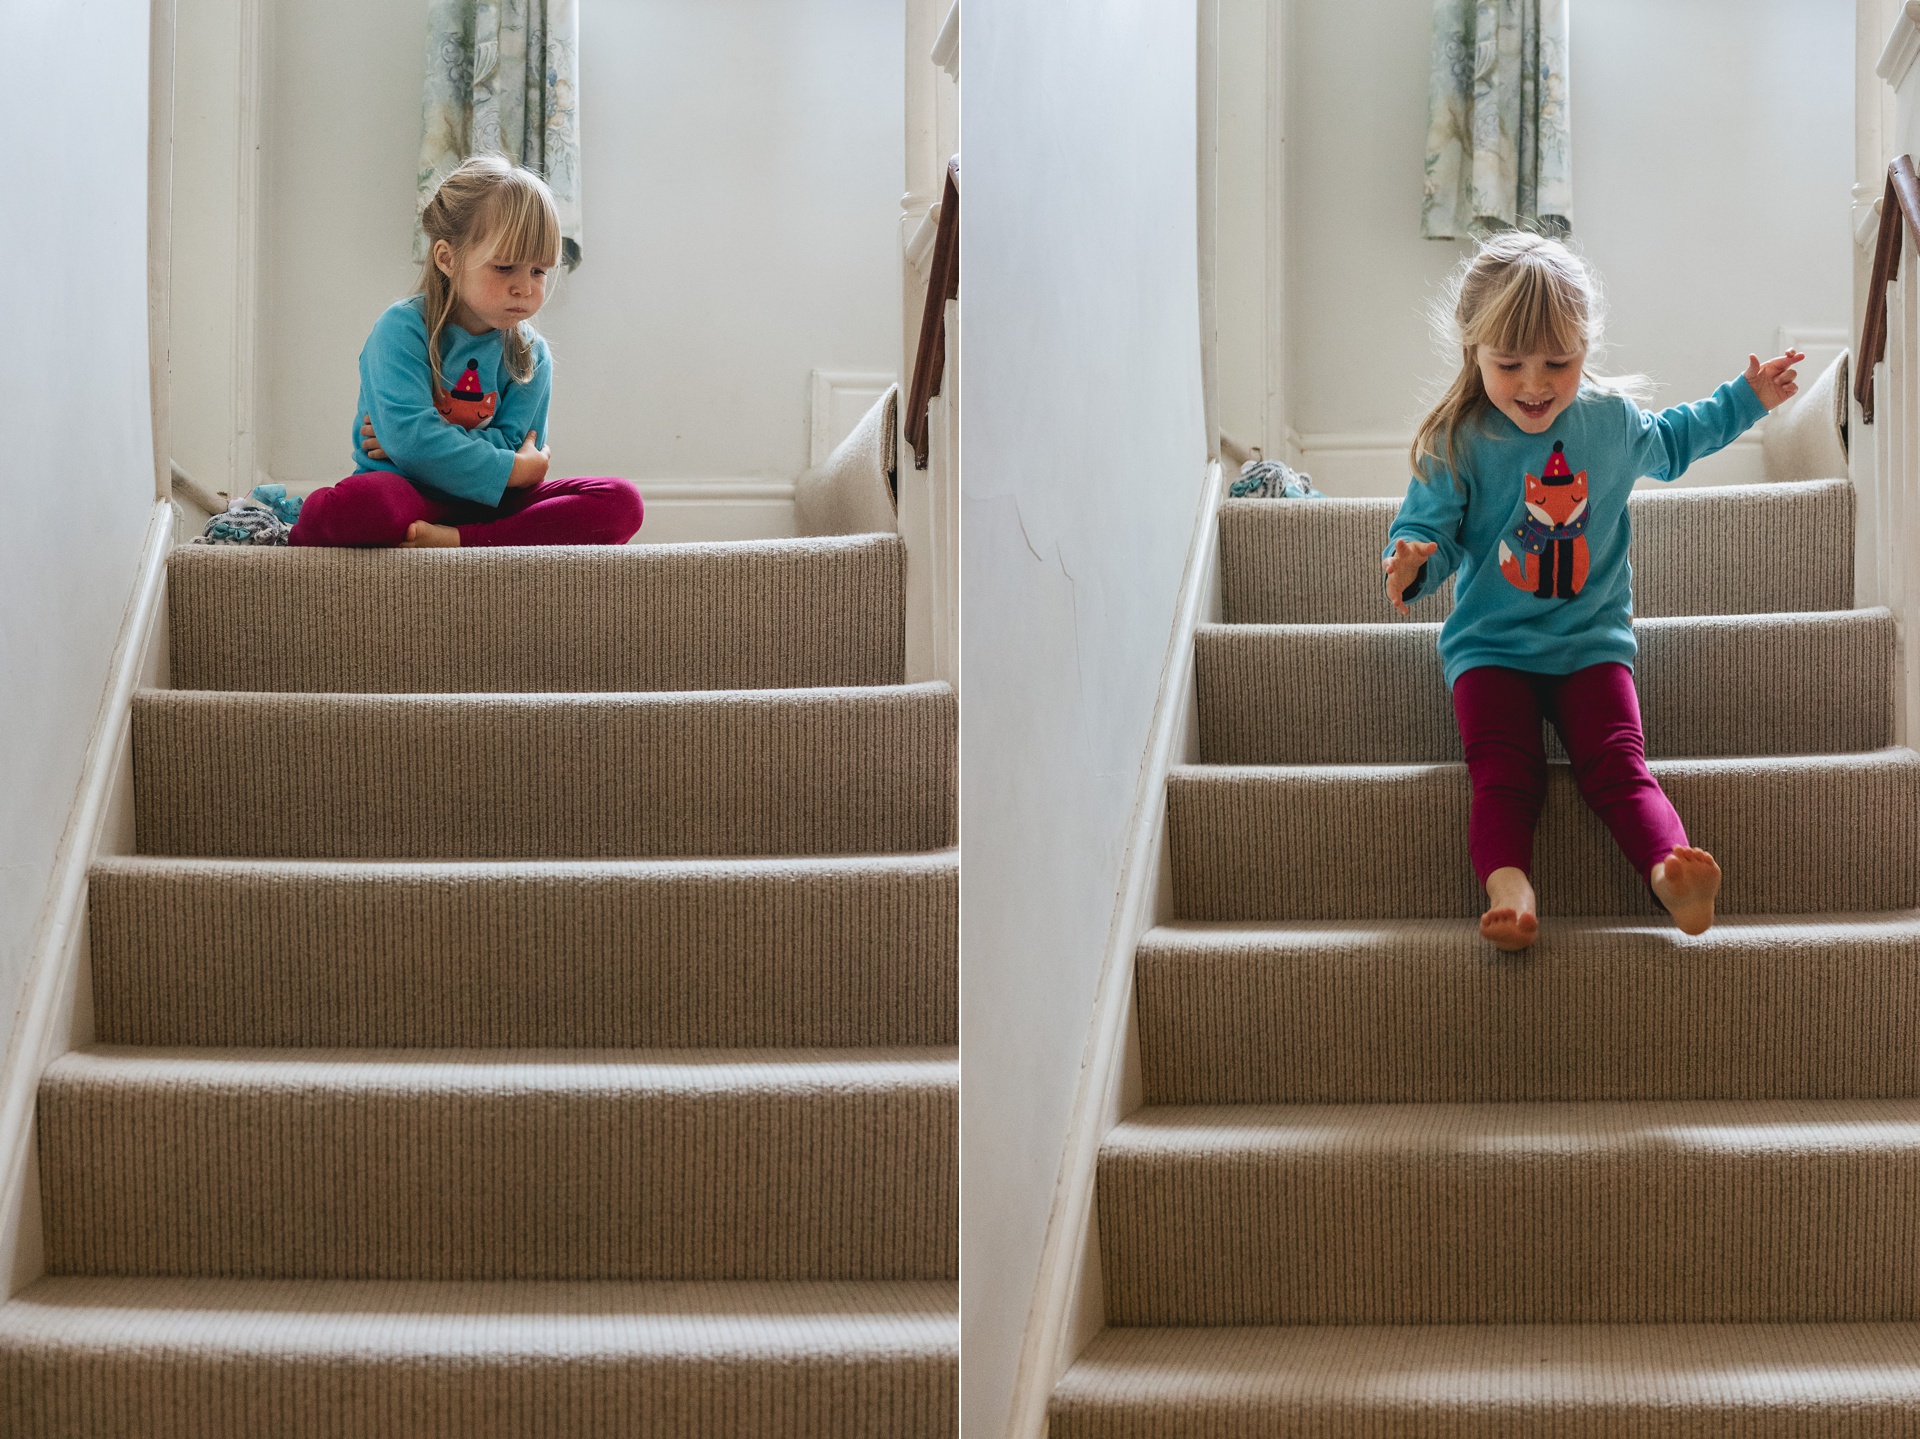 A young girl bouncing down a staircase